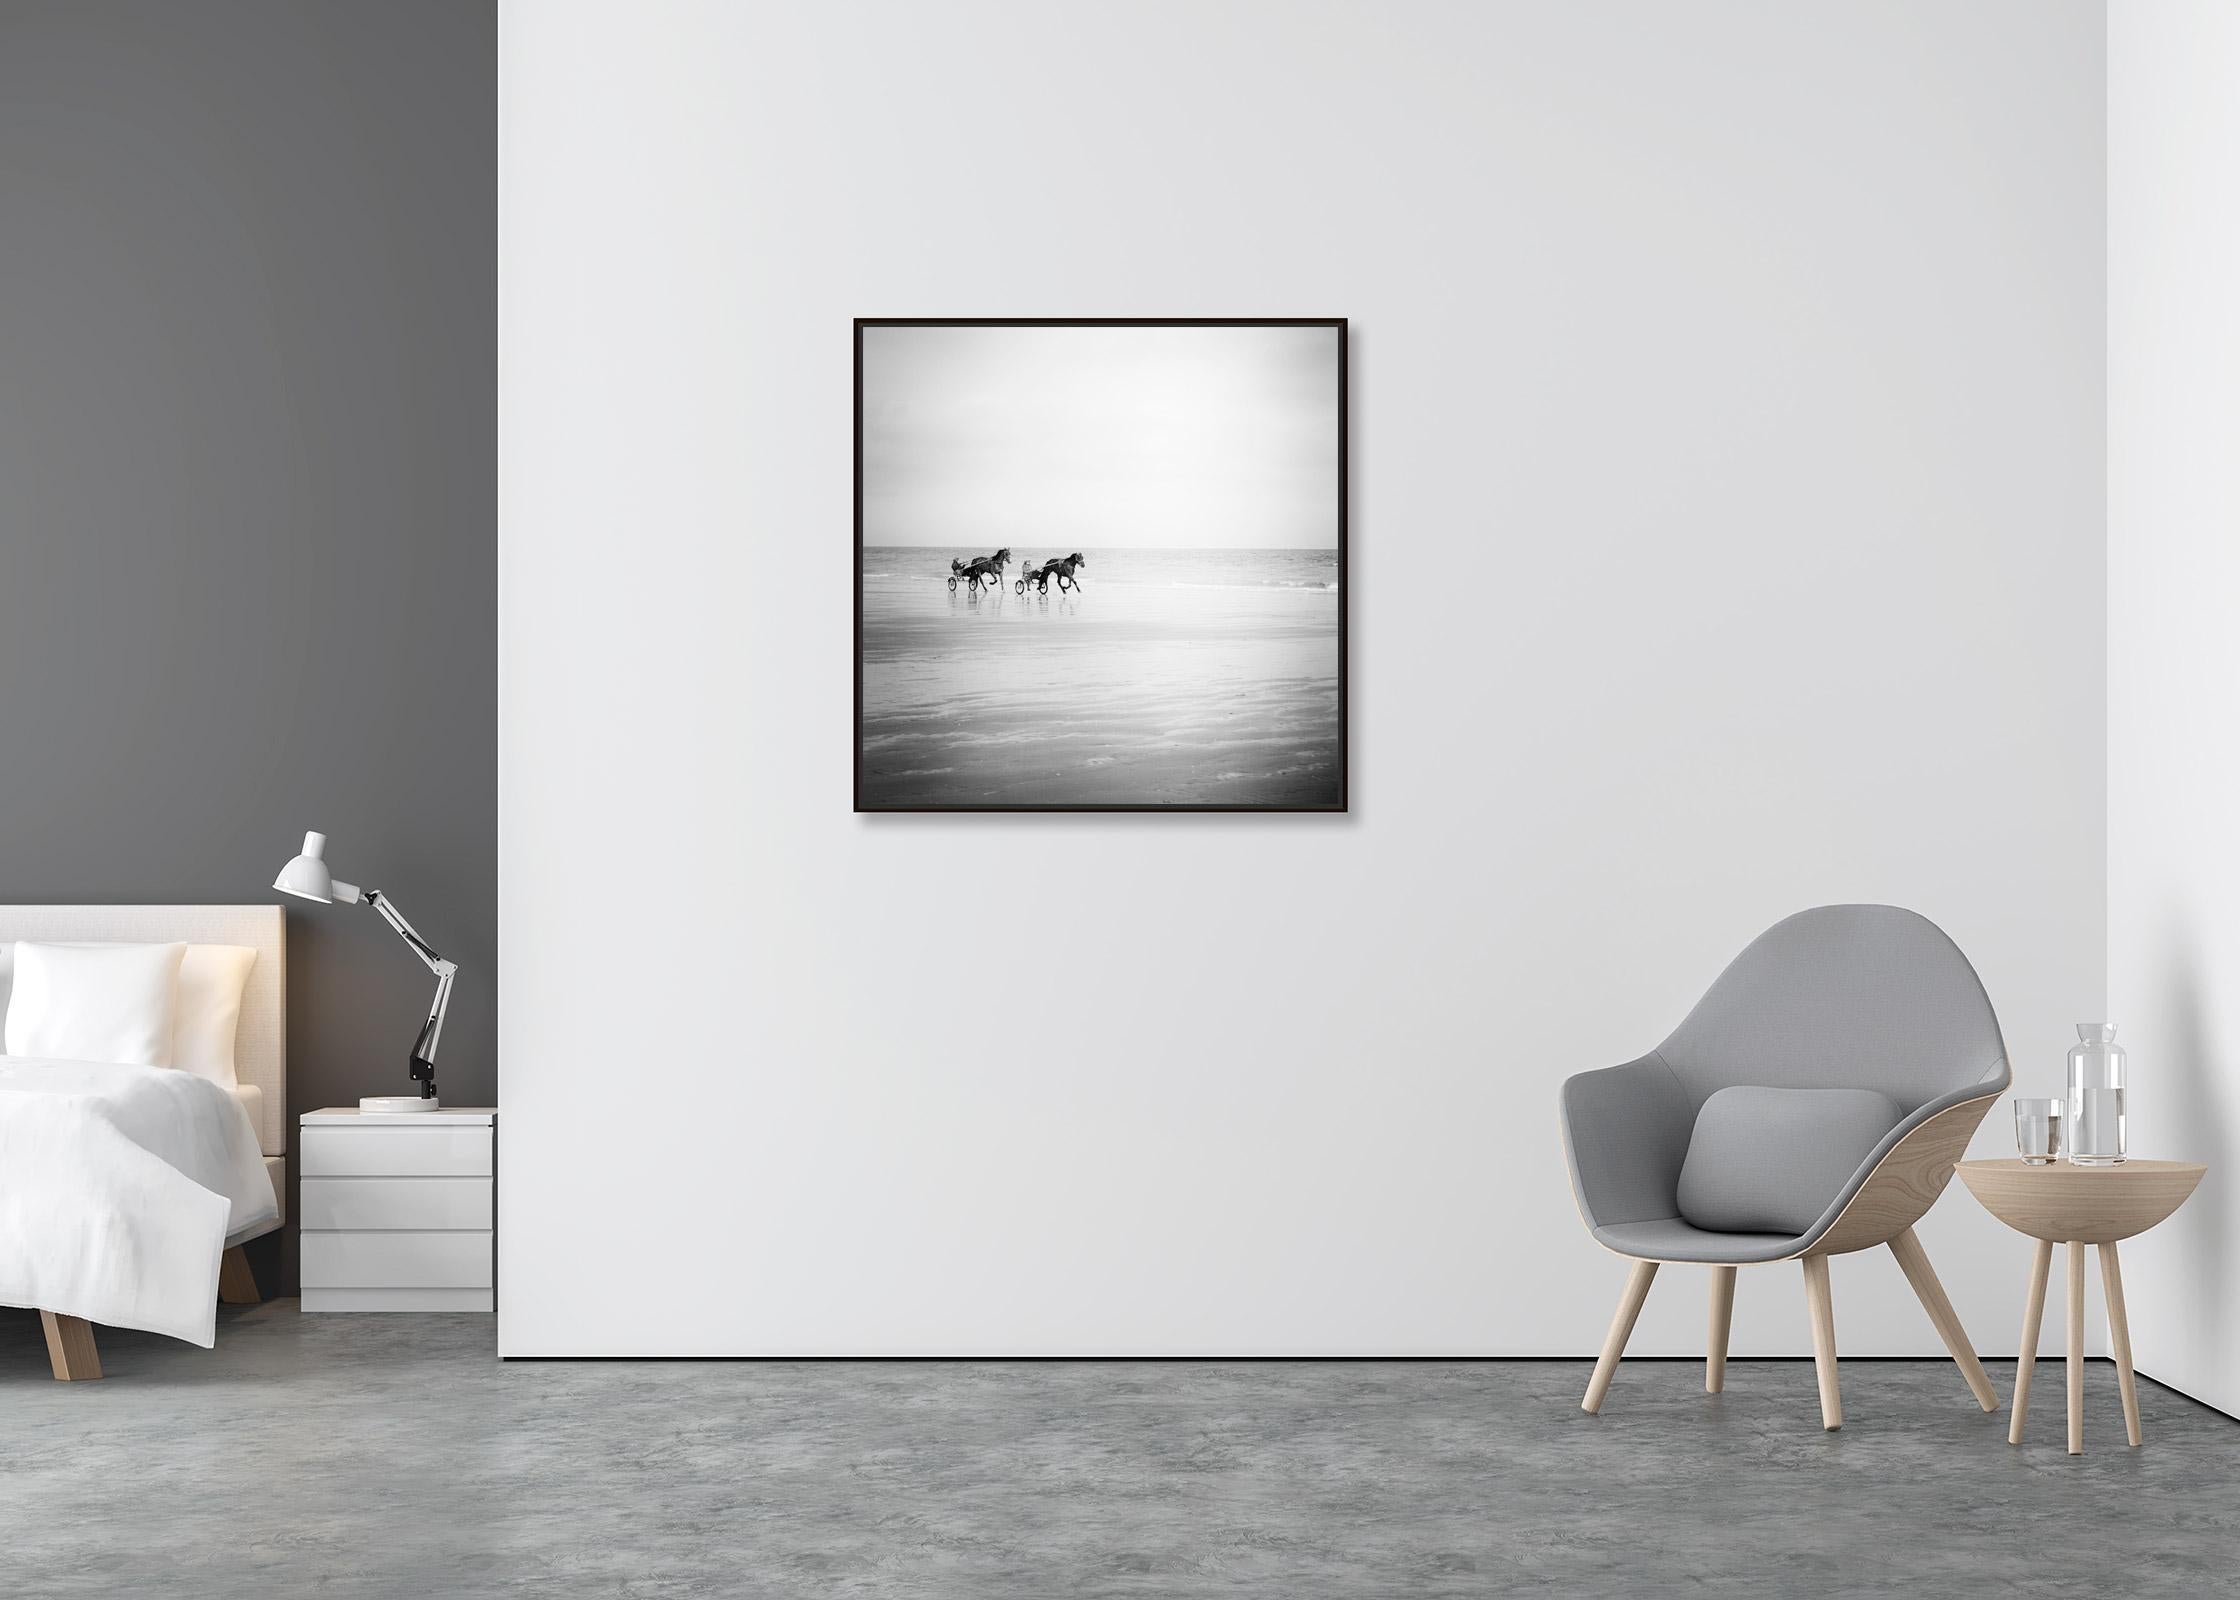 Harness Racing, horses on the beach, France, black white landscape photography - Contemporary Photograph by Gerald Berghammer